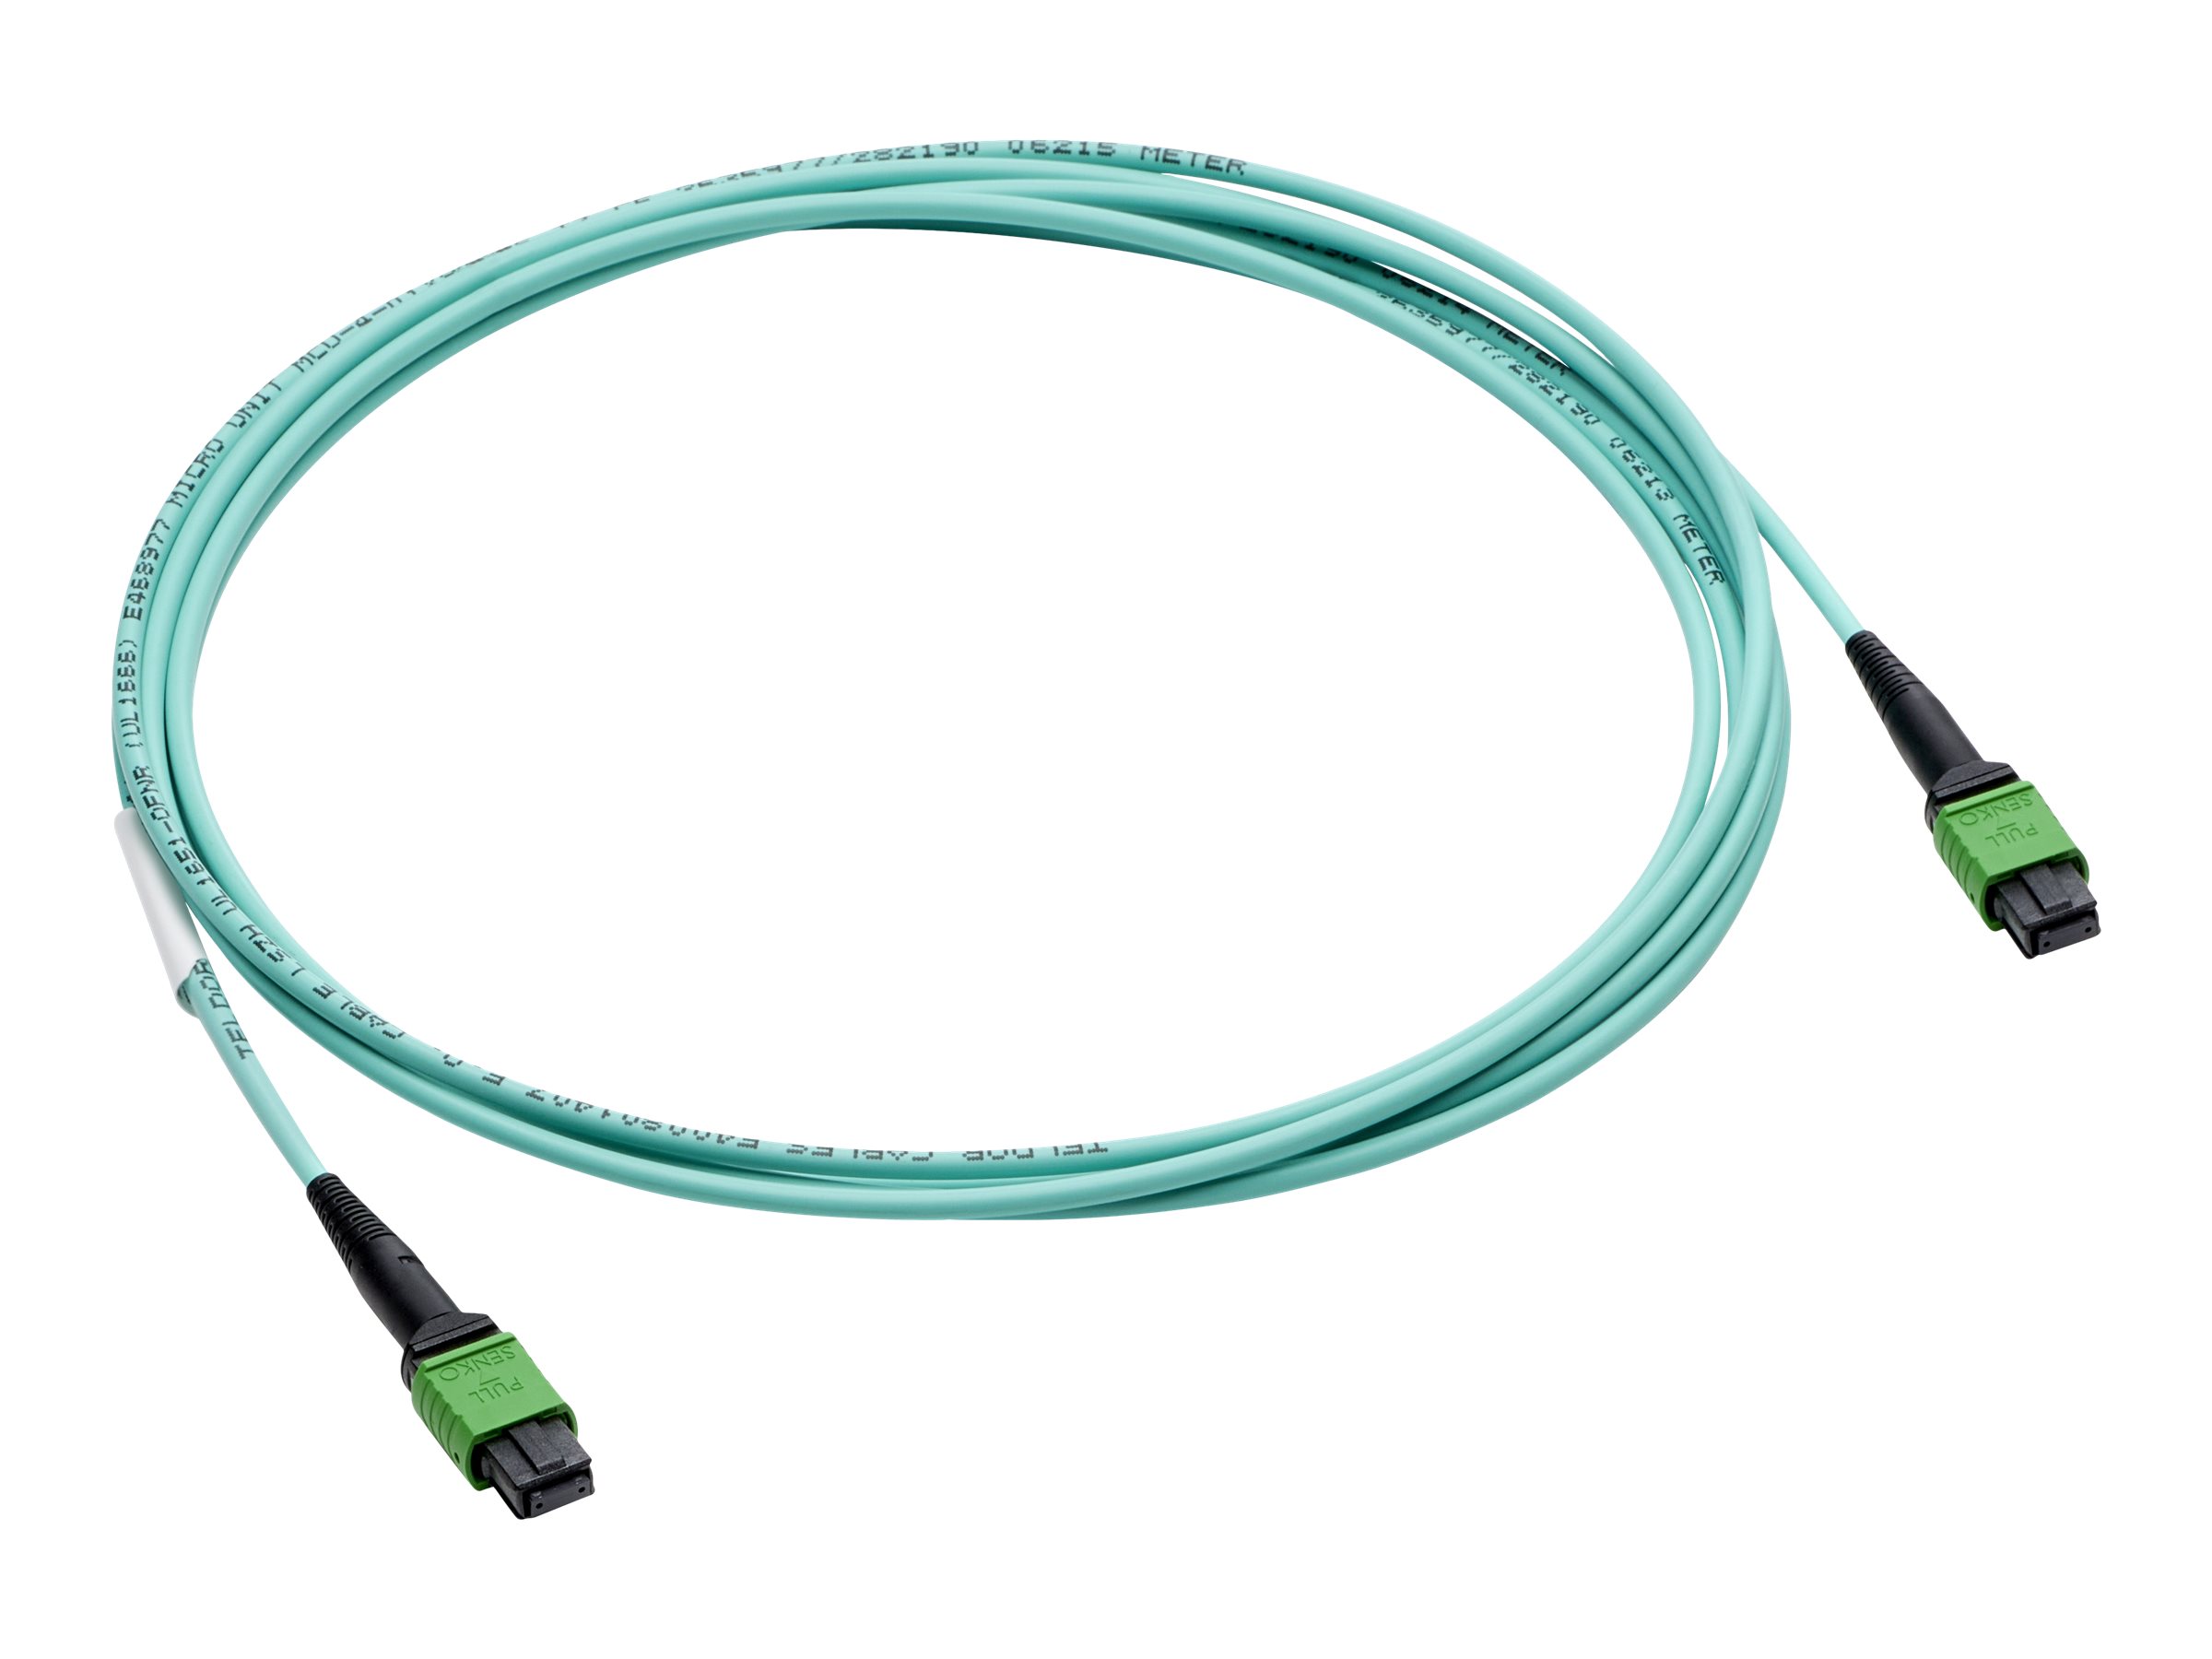 HPE - InfiniBand-Kabel - MPO-8 zu MPO-8 - 20 m - Glasfaser - Ethernet-Support